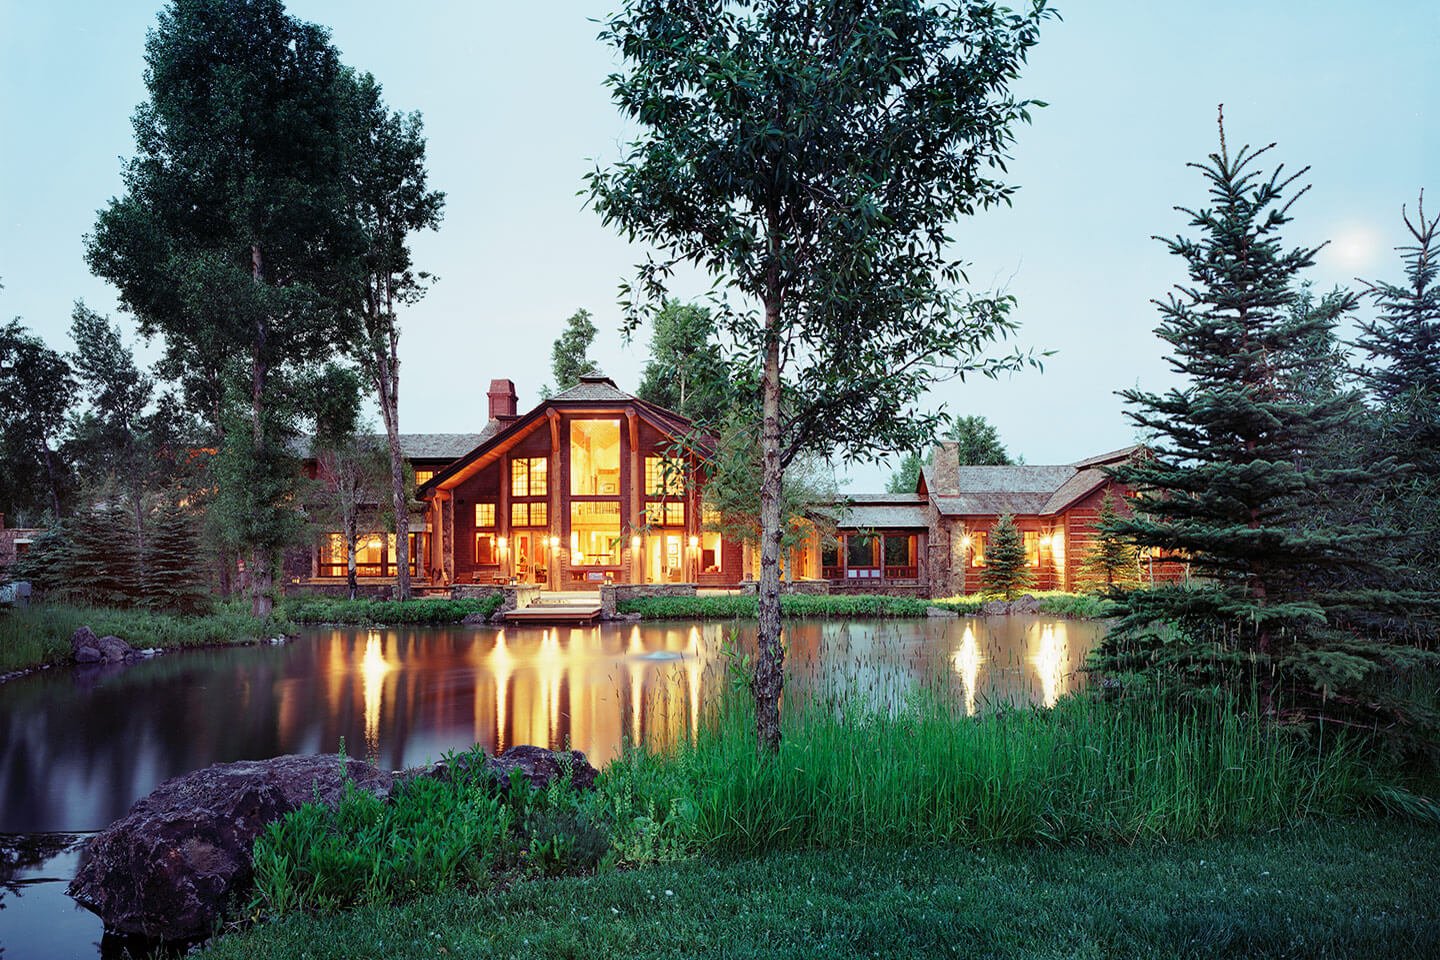 Log home at twilight with reflections in the water